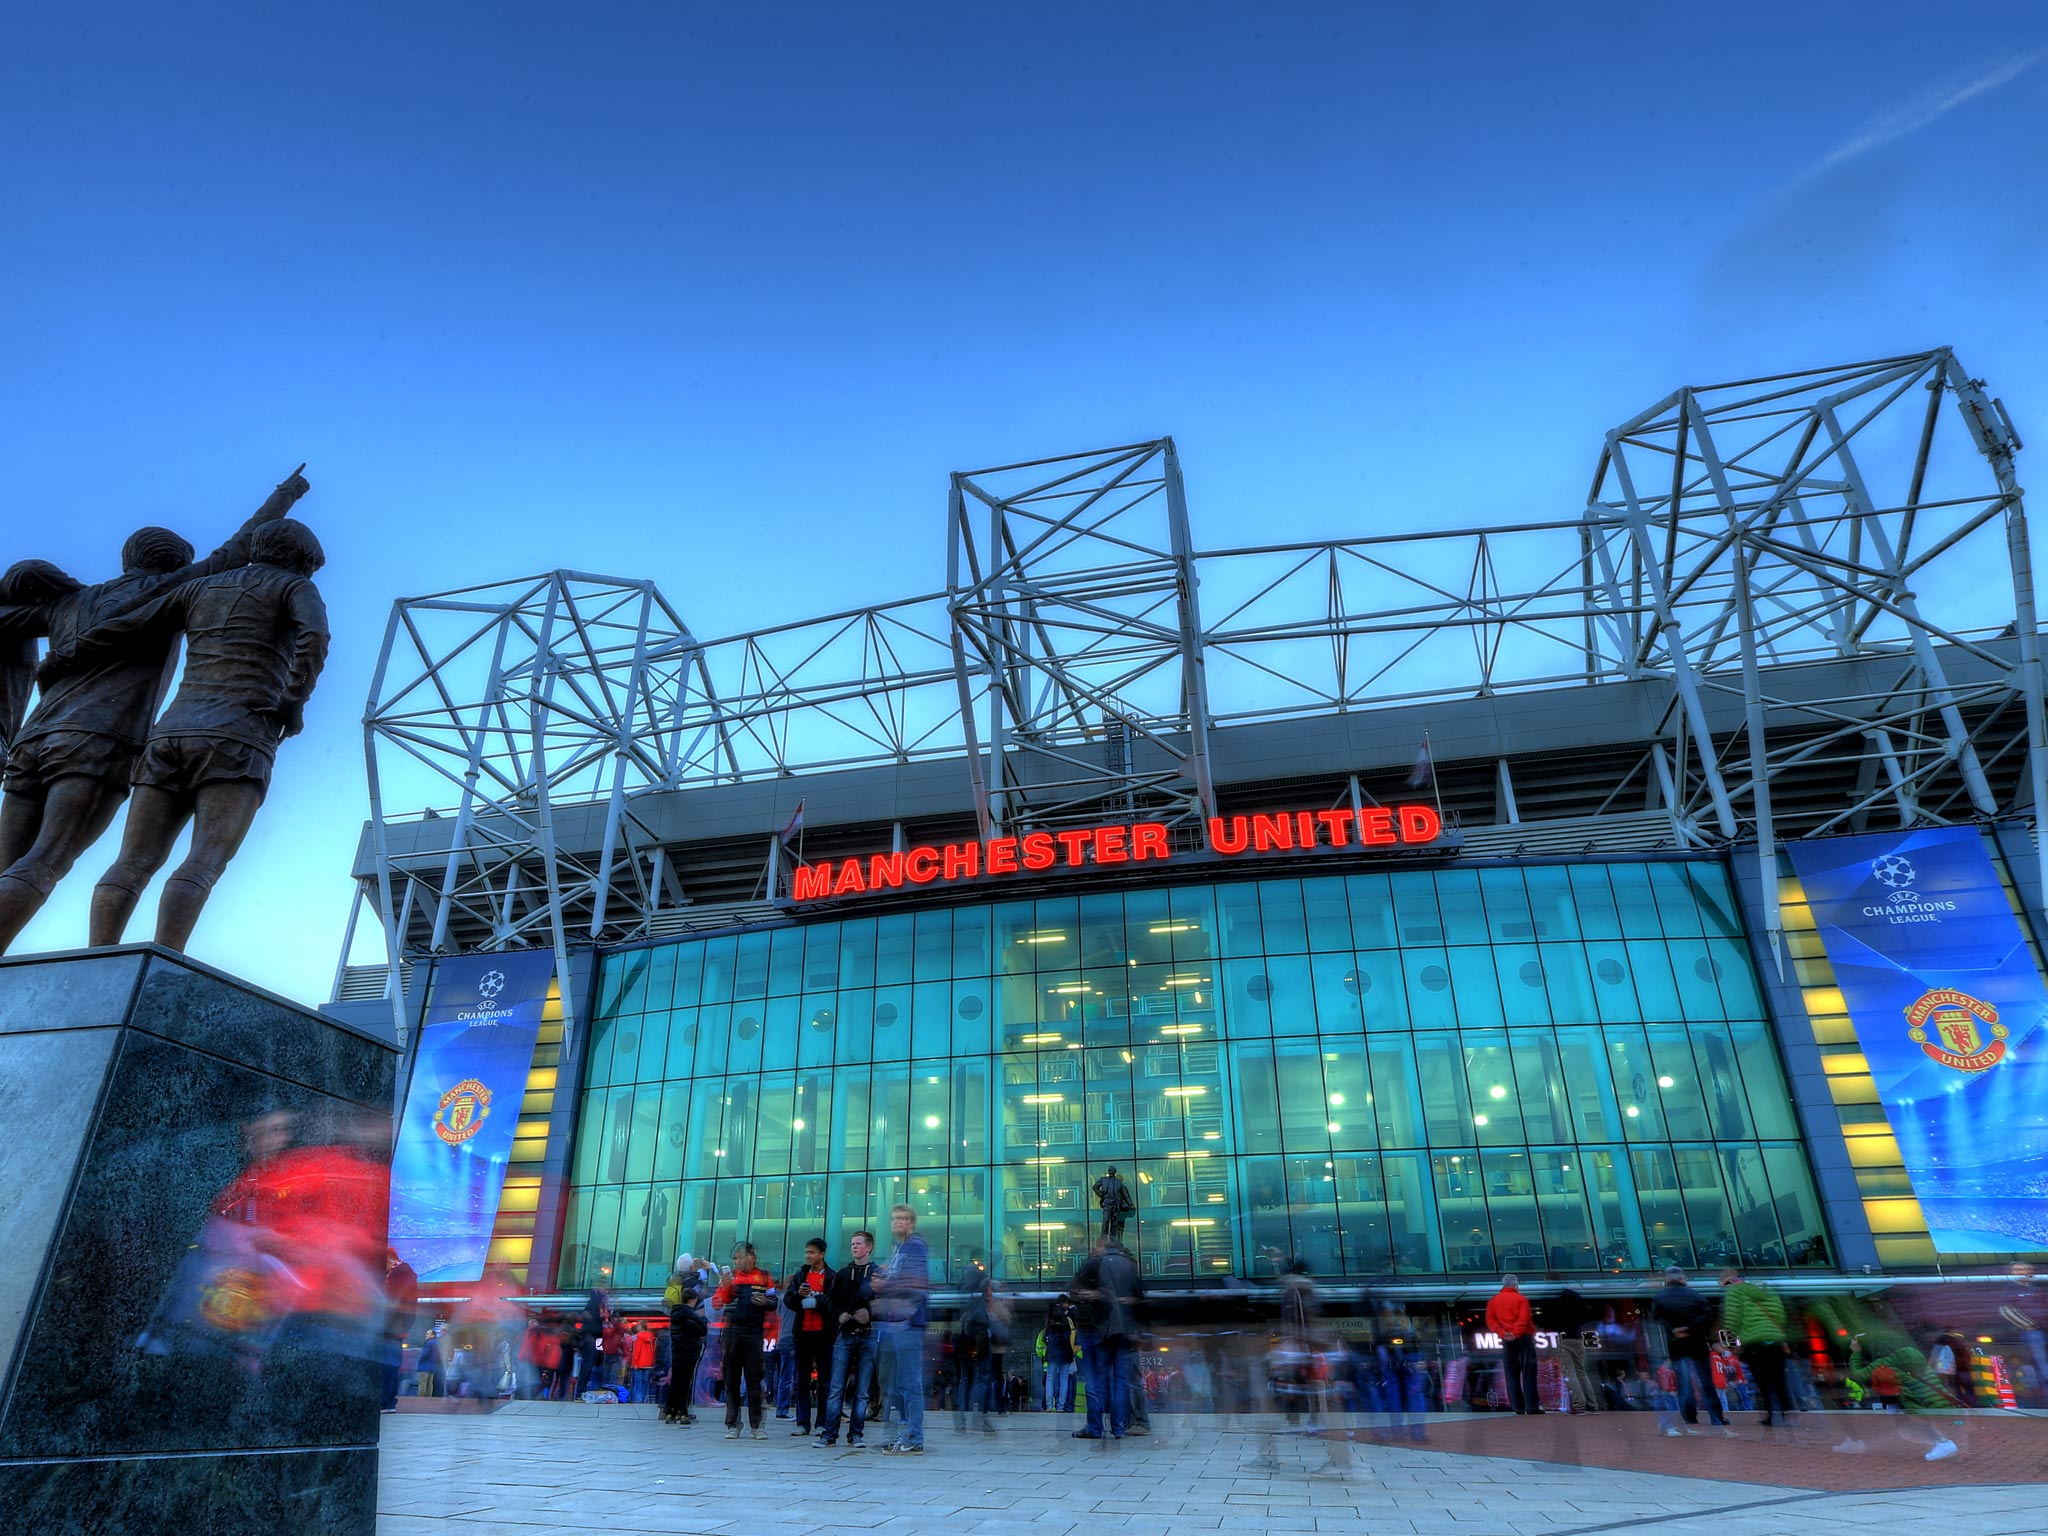 A view outside Old Trafford